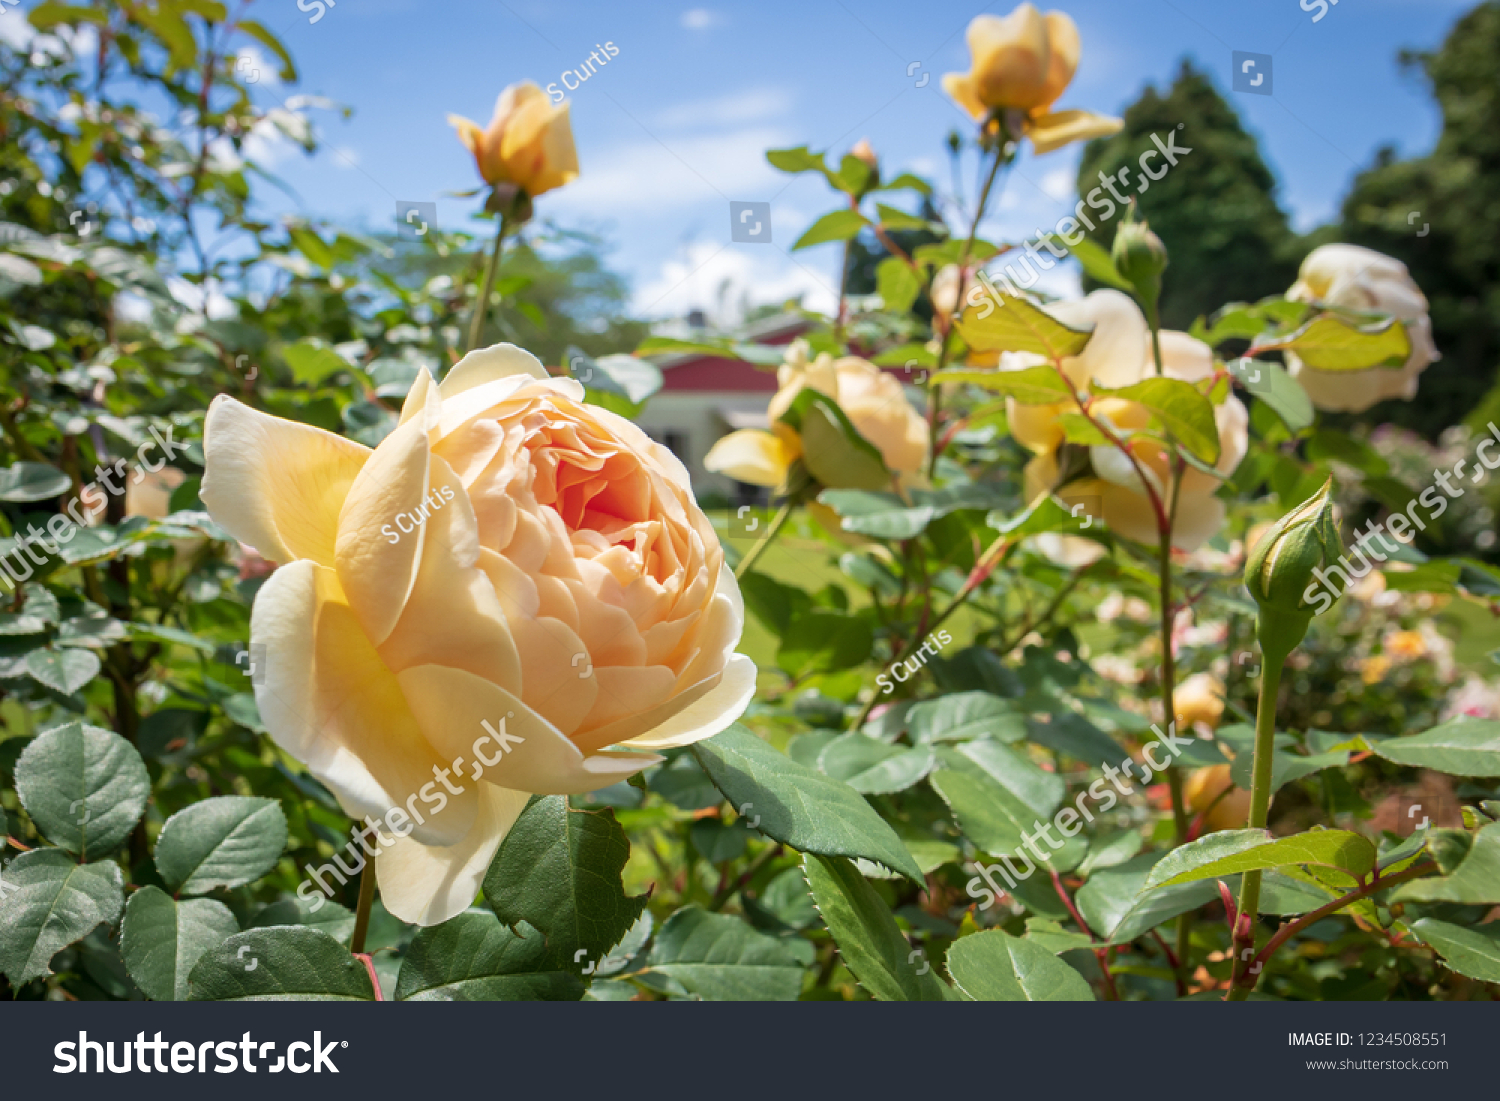 roses full bloom spring country garden stock photo (edit now